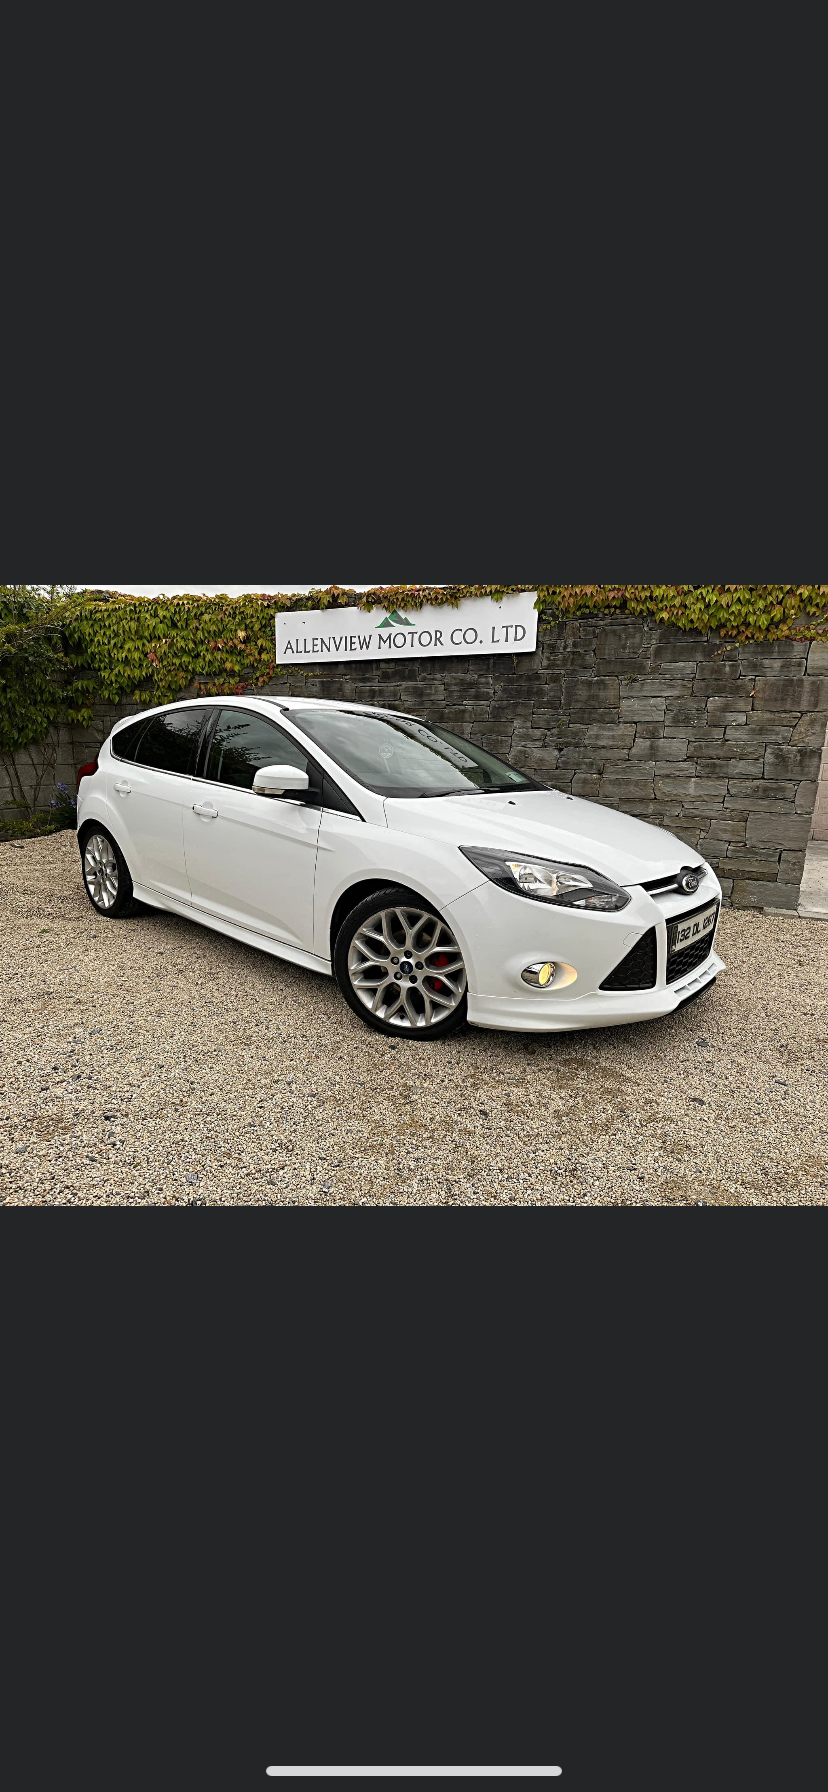 Used Ford Focus 2013 in Kildare